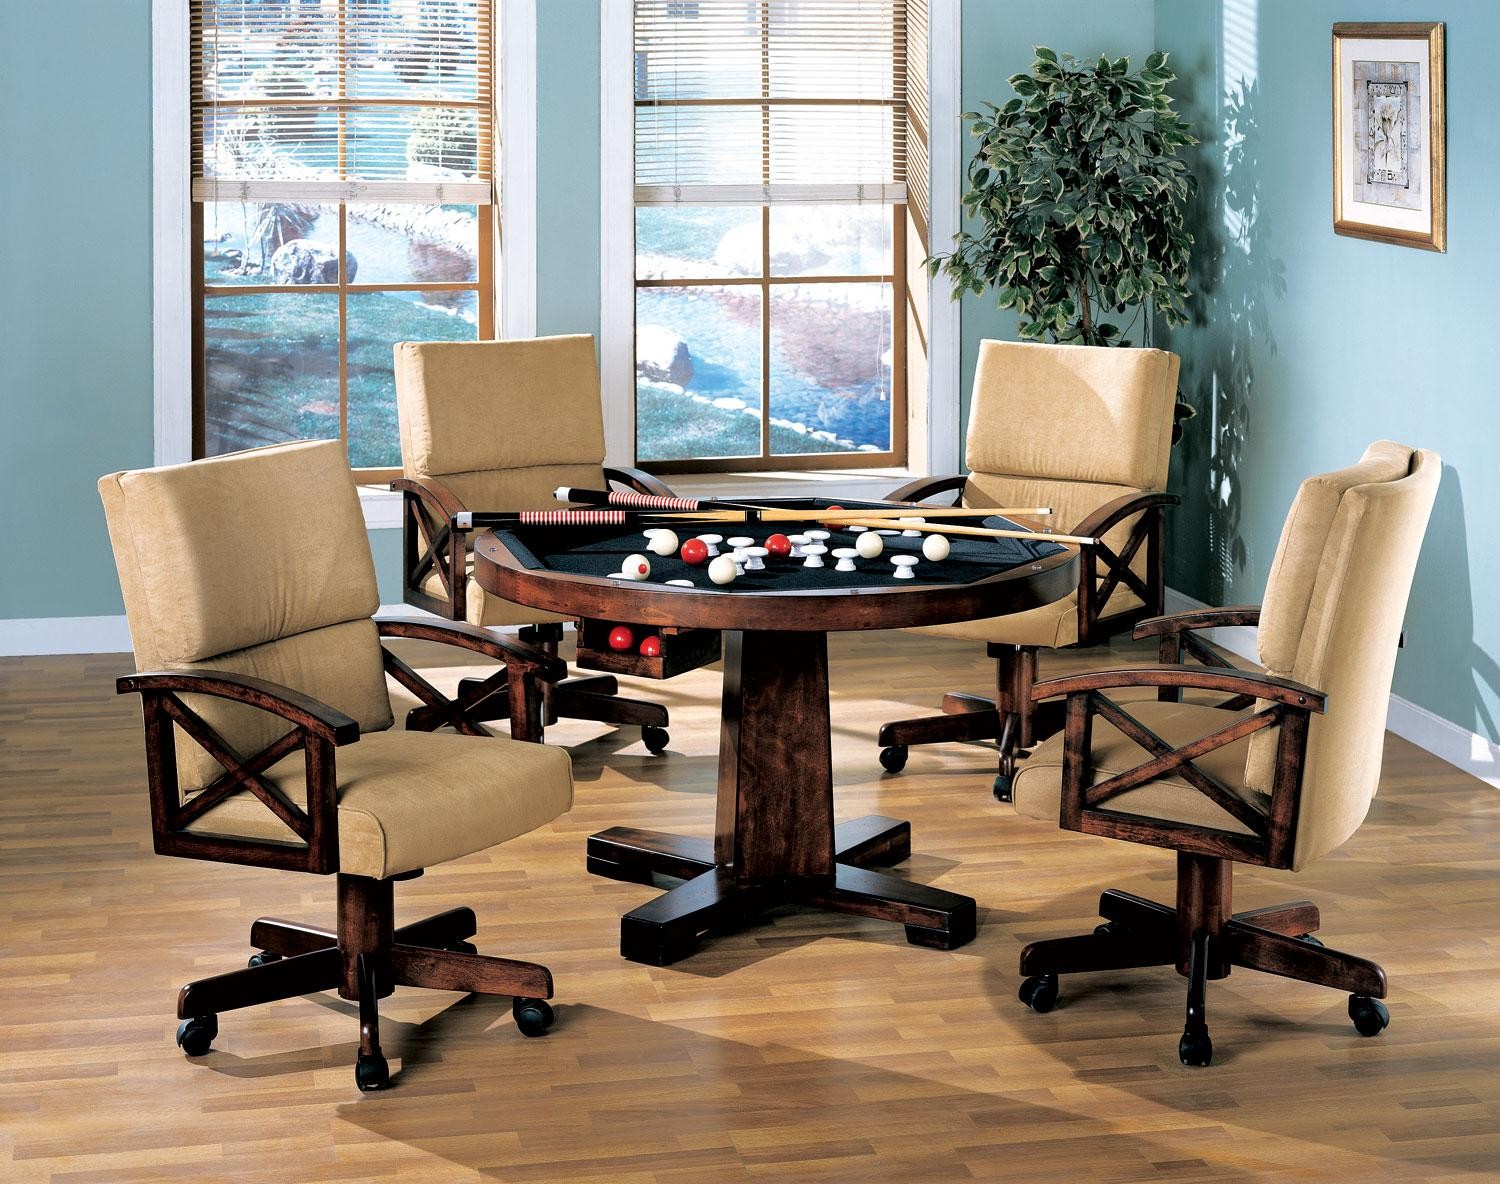 Marietta 3-in-1 Game Table W/4 Chairs